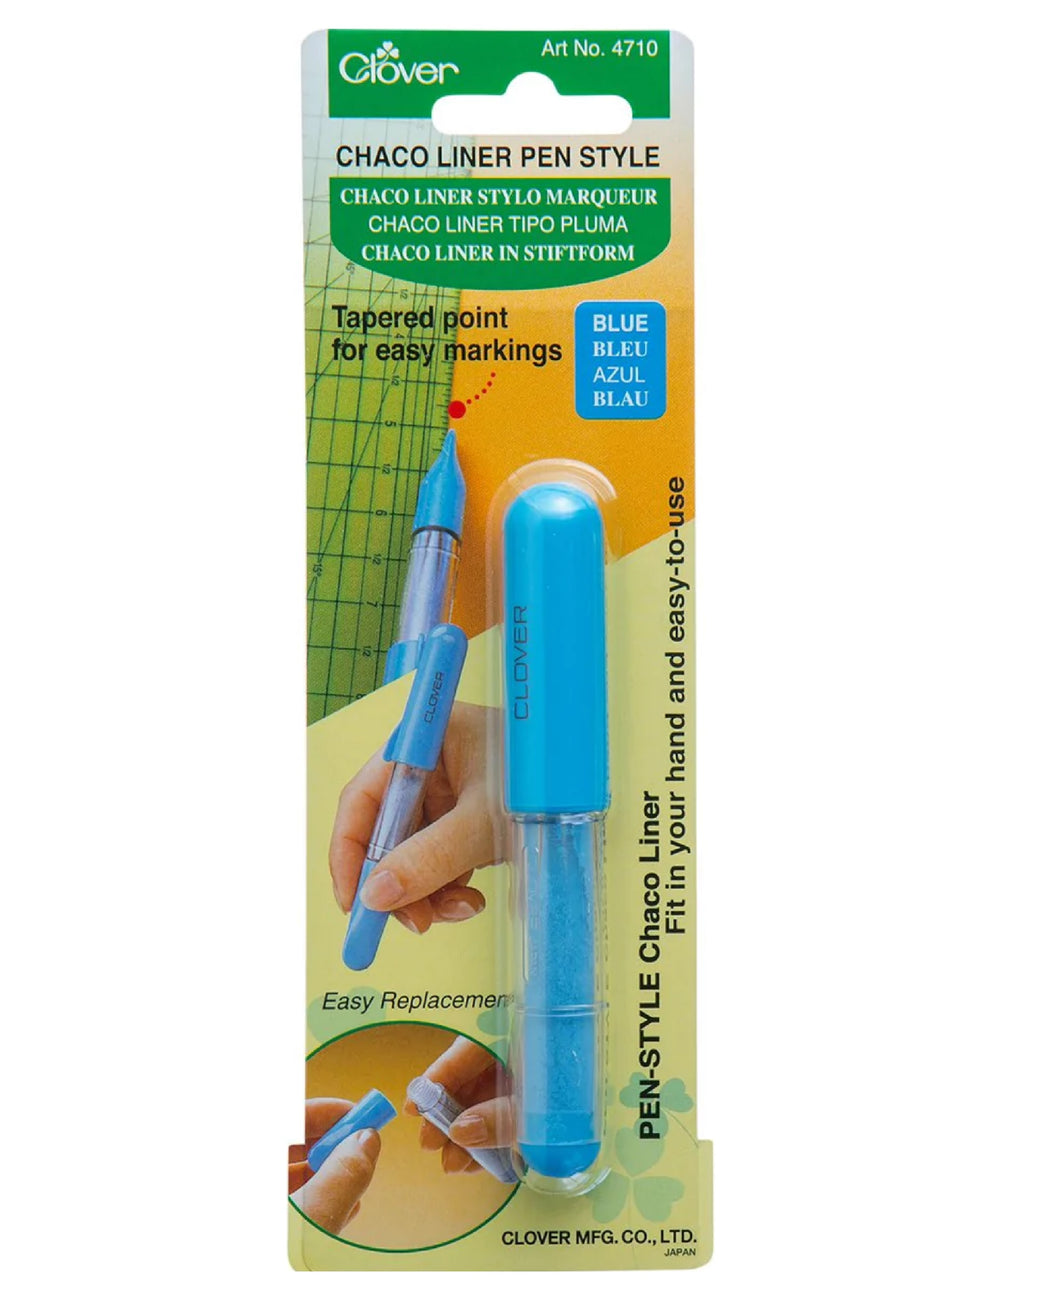 Chaco Liner Pen Style For Sewing_ZIPPERANDTHREAD - Zipper and Thread